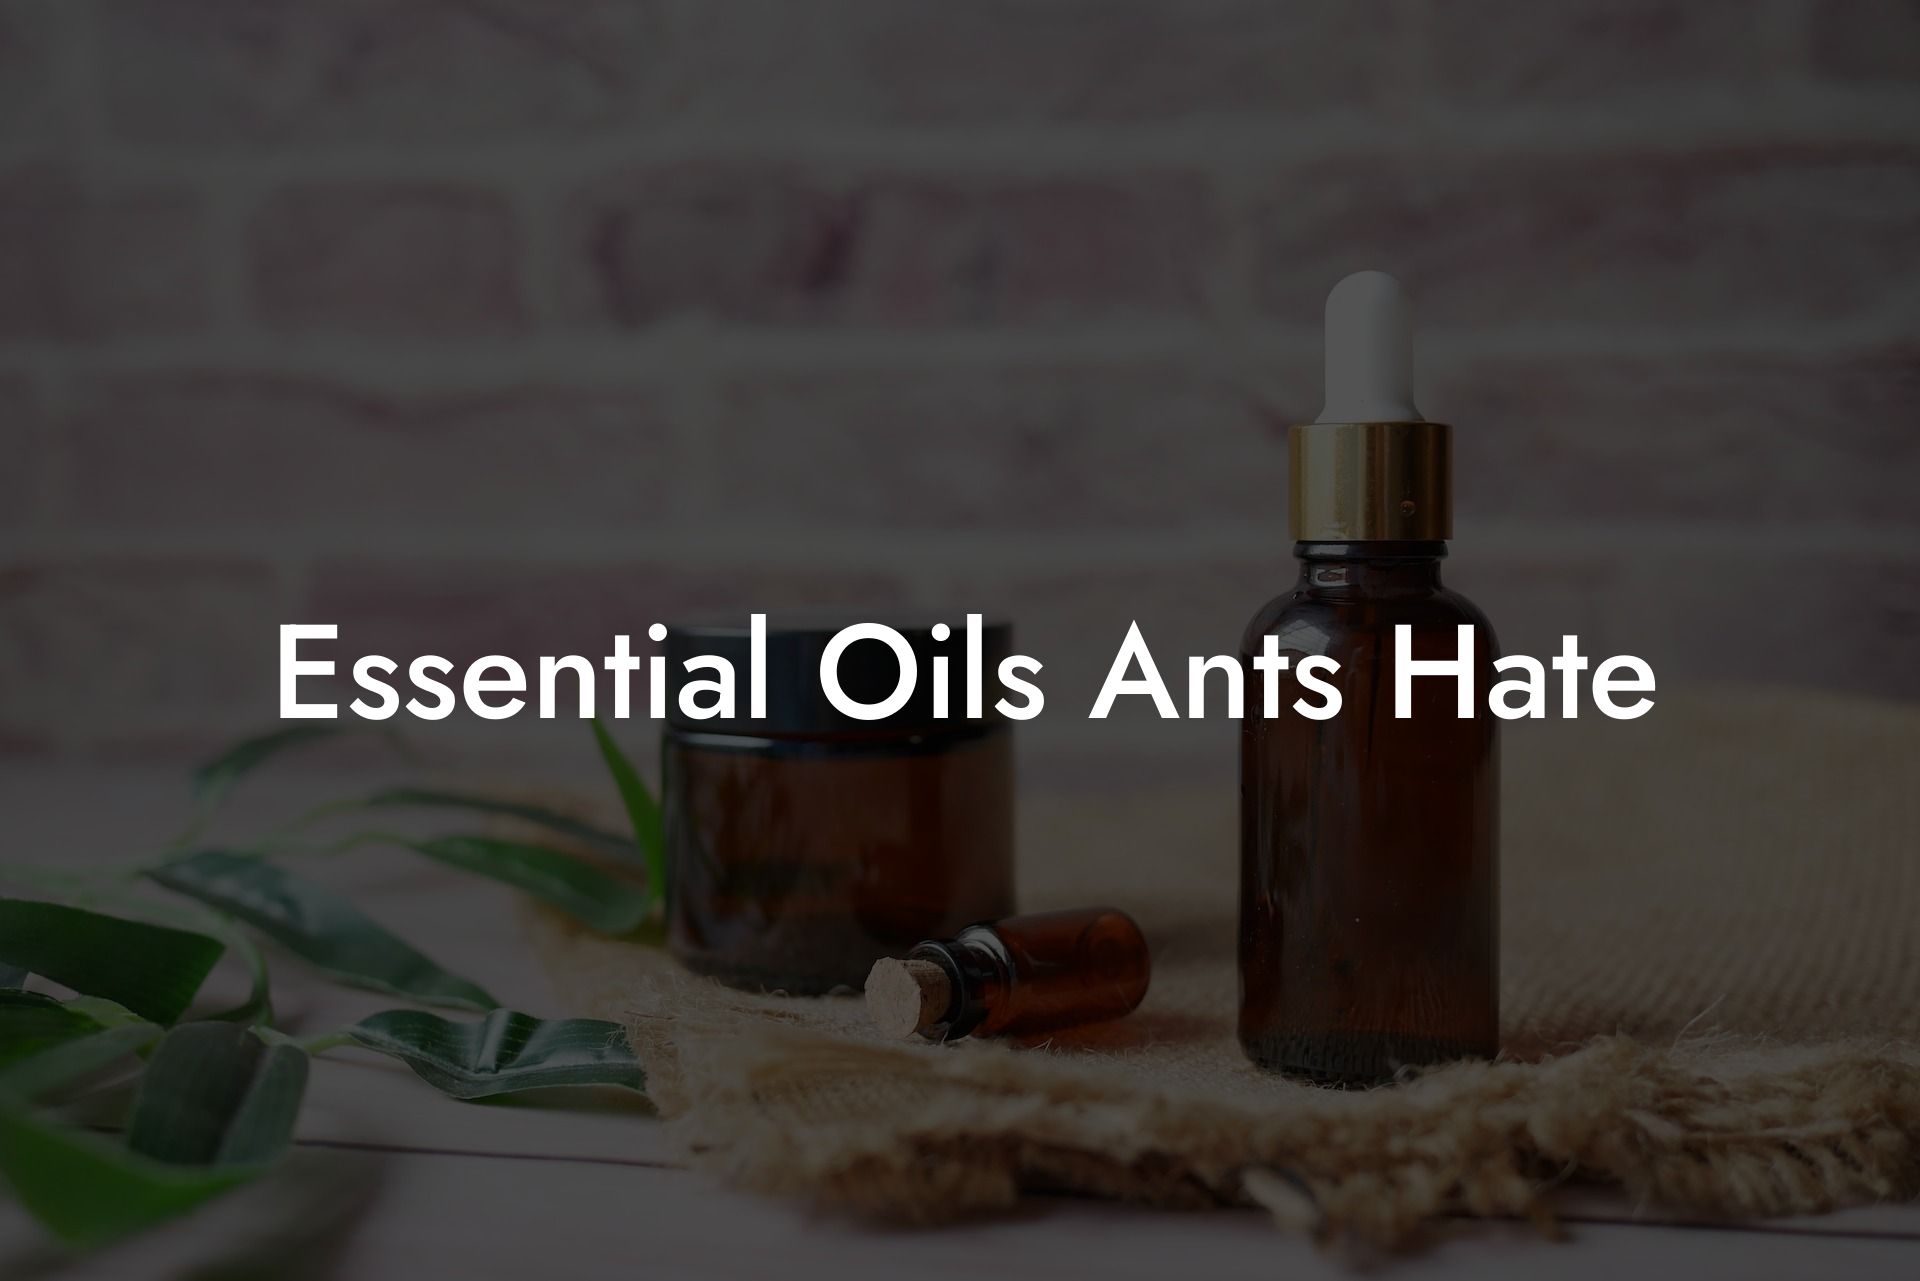 Essential Oils Ants Hate